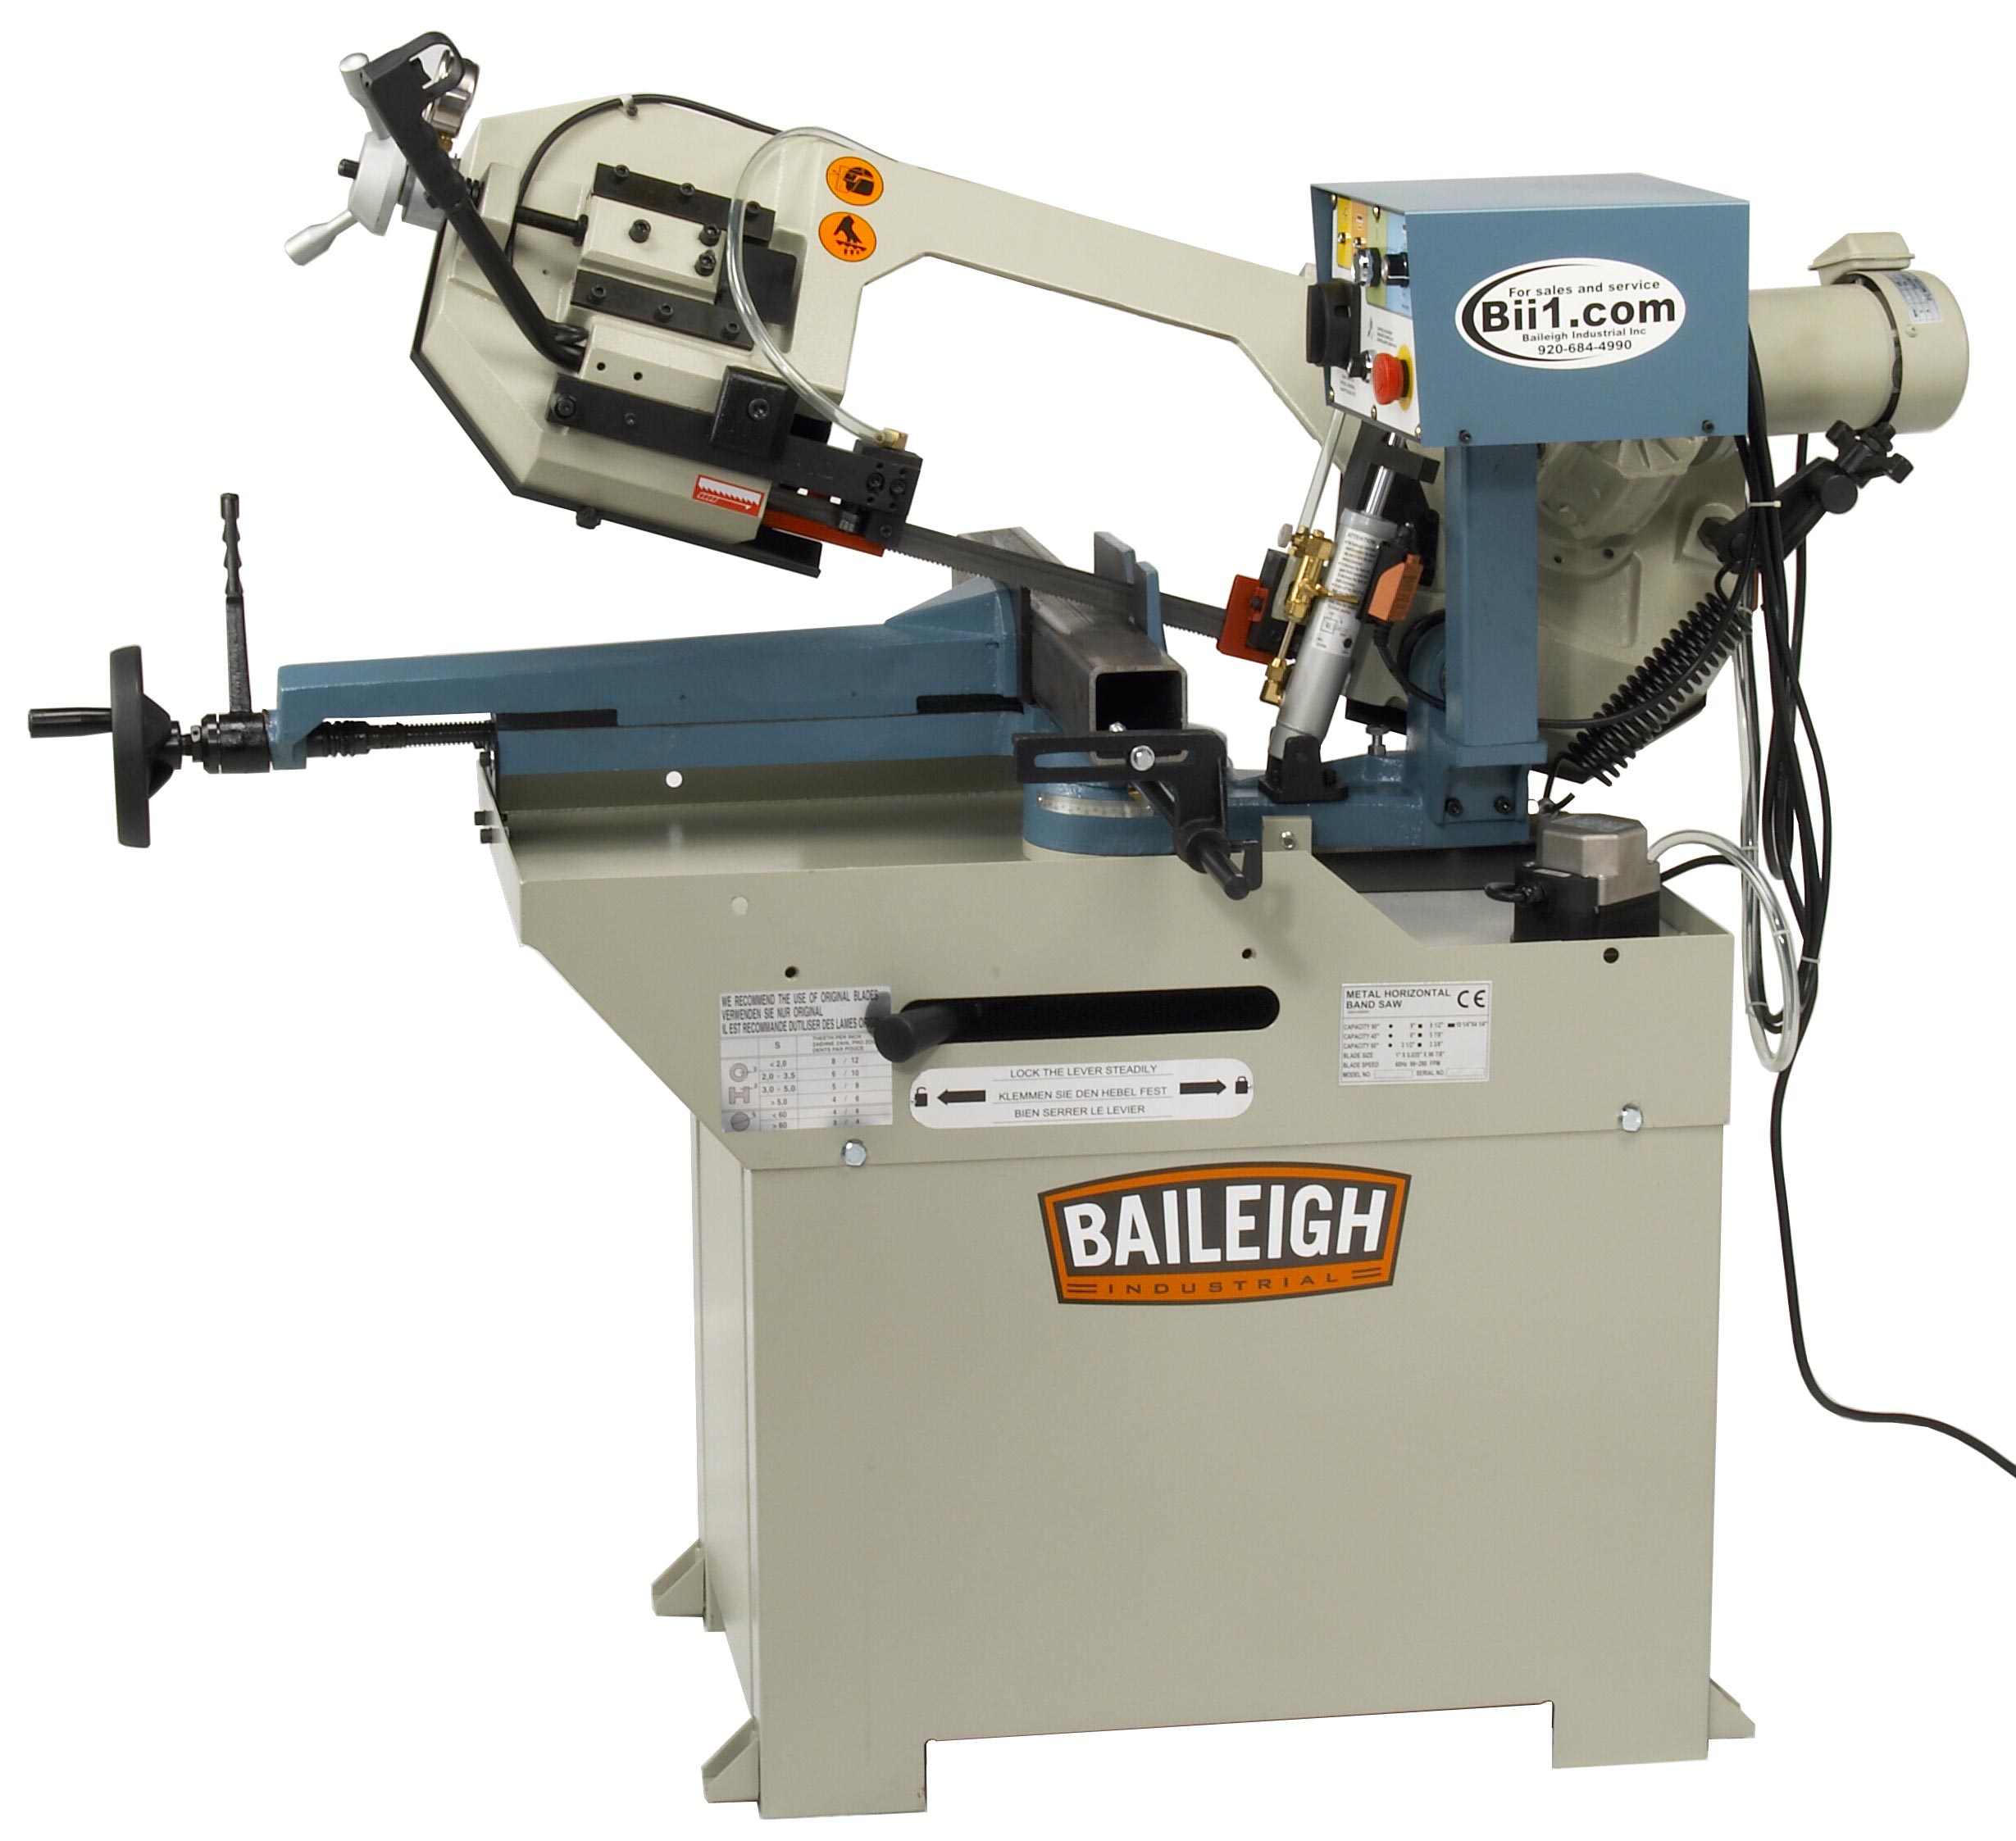 Baileigh Mitering Band Saw BS-250M